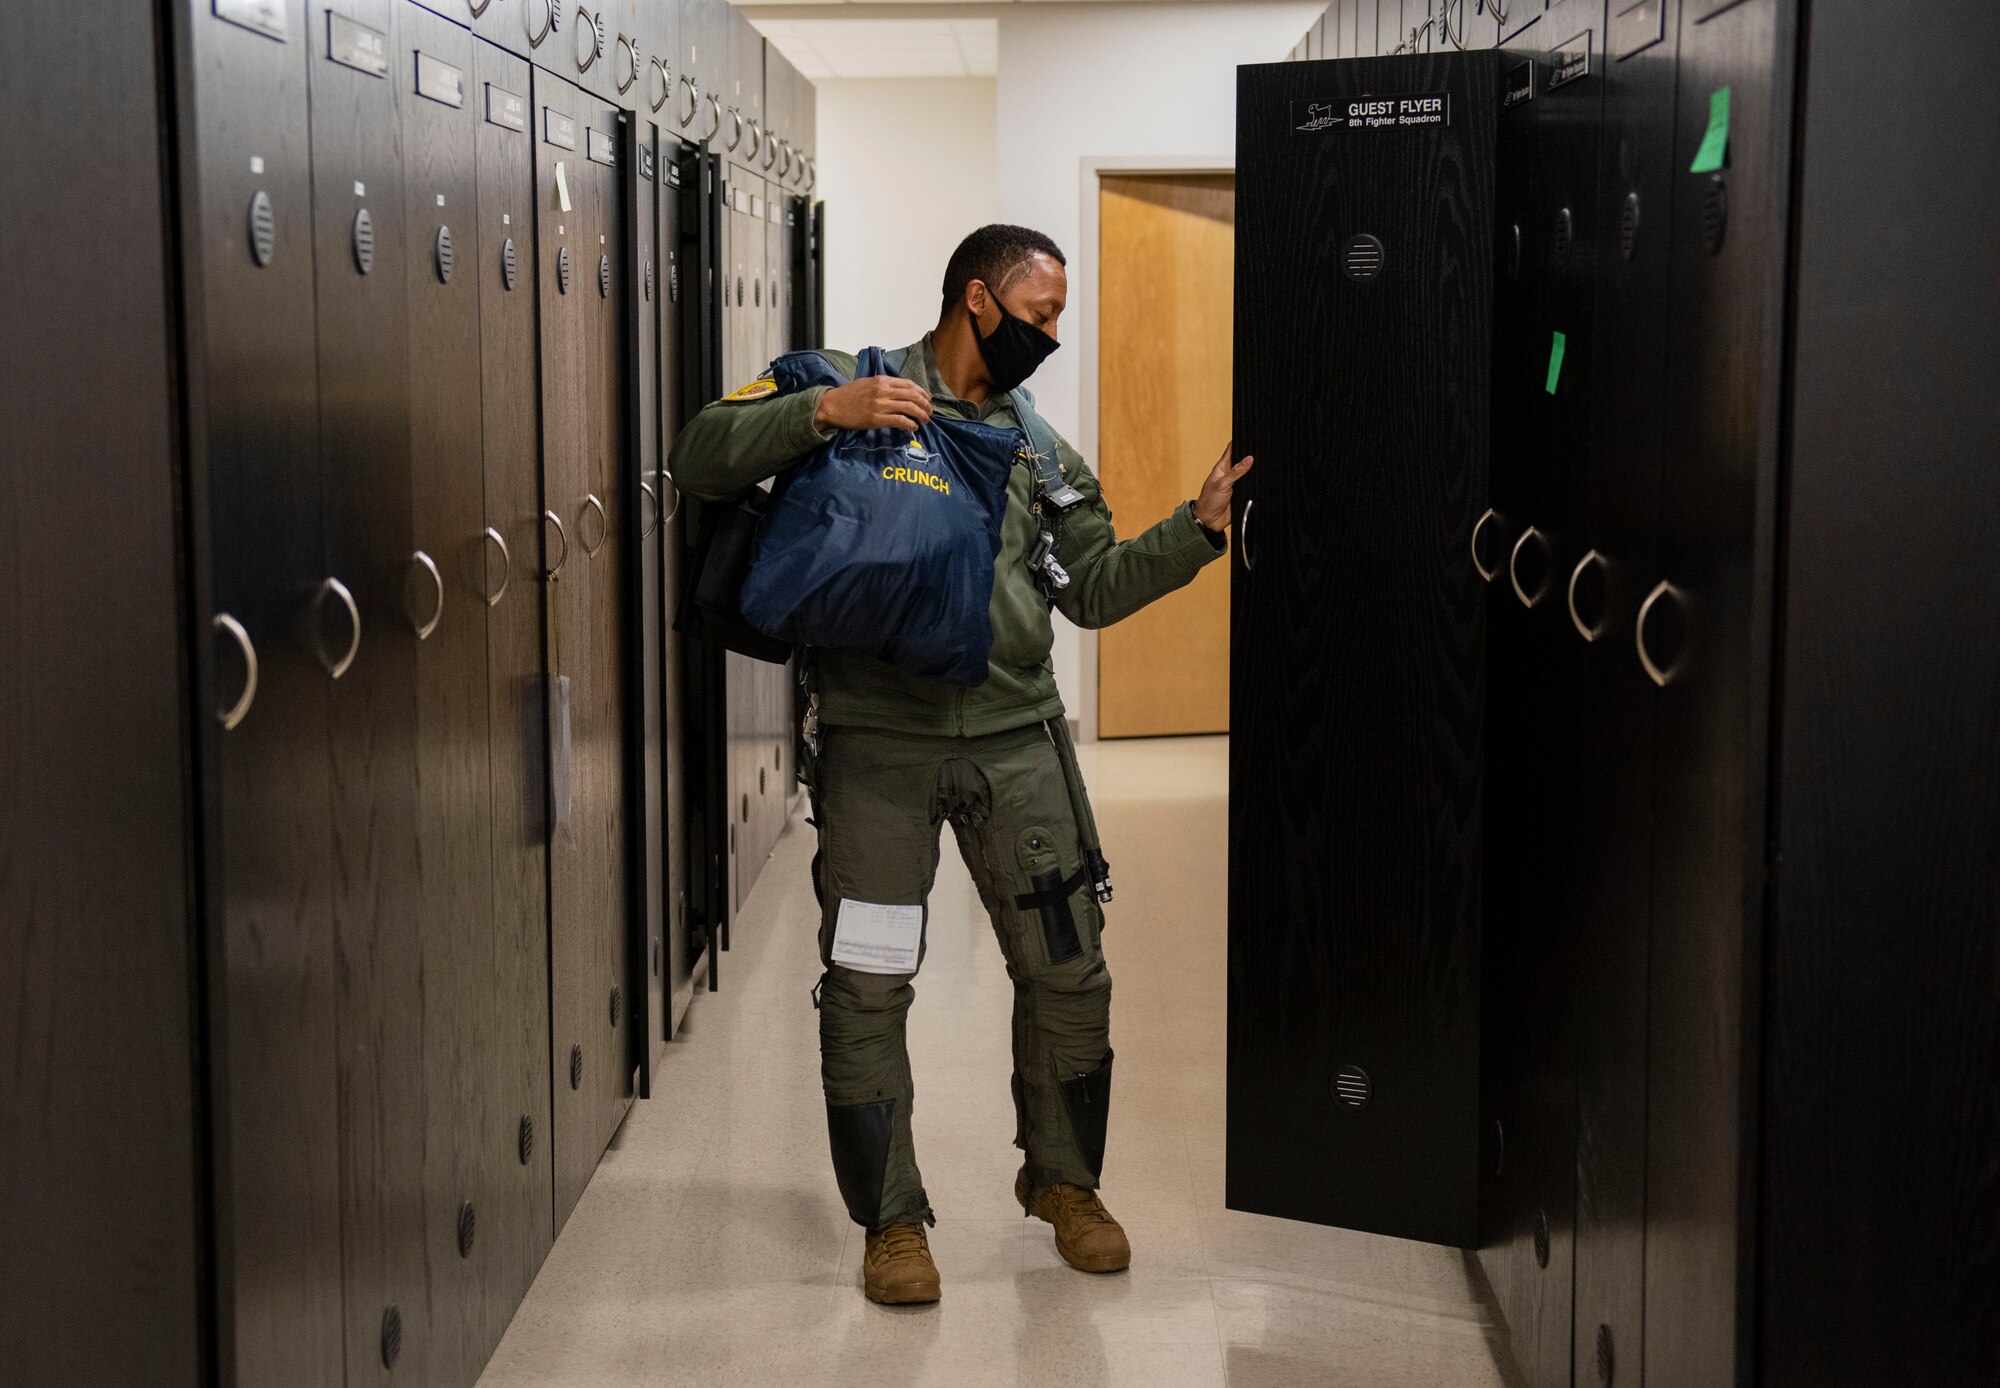 Capt. Michael Craig, 311th Fighter Squadron instructor pilot, puts on a G-suit before a flight, Feb. 18, 2021, on Holloman Air Force Base, N.M. A total of 21 Black Airmen from various Wings across the Air Force integrated F-16, C-17 Globemaster III and KC-135 Stratotanker operations, simulating the training and execution of the Tuskegee Airmen. (U.S. Air Force photo by Airman 1st Class Quion Lowe)